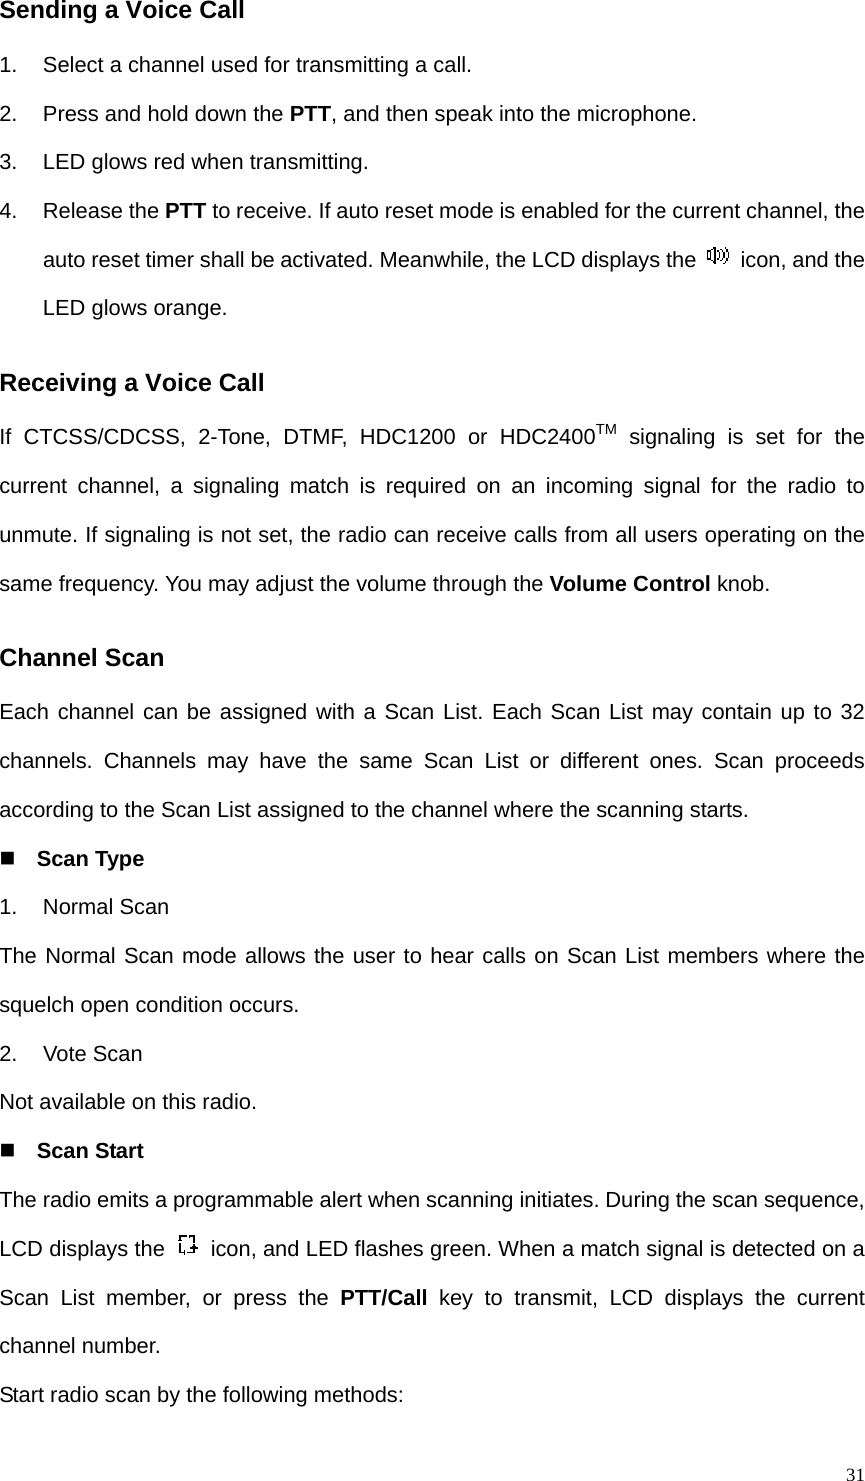   31Sending a Voice Call 1.  Select a channel used for transmitting a call. 2.  Press and hold down the PTT, and then speak into the microphone. 3.  LED glows red when transmitting.   4. Release the PTT to receive. If auto reset mode is enabled for the current channel, the auto reset timer shall be activated. Meanwhile, the LCD displays the    icon, and the LED glows orange.   Receiving a Voice Call If CTCSS/CDCSS, 2-Tone, DTMF, HDC1200 or HDC2400TM signaling is set for the current channel, a signaling match is required on an incoming signal for the radio to unmute. If signaling is not set, the radio can receive calls from all users operating on the same frequency. You may adjust the volume through the Volume Control knob. Channel Scan Each channel can be assigned with a Scan List. Each Scan List may contain up to 32 channels. Channels may have the same Scan List or different ones. Scan proceeds according to the Scan List assigned to the channel where the scanning starts.  Scan Type 1. Normal Scan The Normal Scan mode allows the user to hear calls on Scan List members where the squelch open condition occurs.   2. Vote Scan Not available on this radio.  Scan Start The radio emits a programmable alert when scanning initiates. During the scan sequence, LCD displays the    icon, and LED flashes green. When a match signal is detected on a Scan List member, or press the PTT/Call key to transmit, LCD displays the current channel number.   Start radio scan by the following methods: 